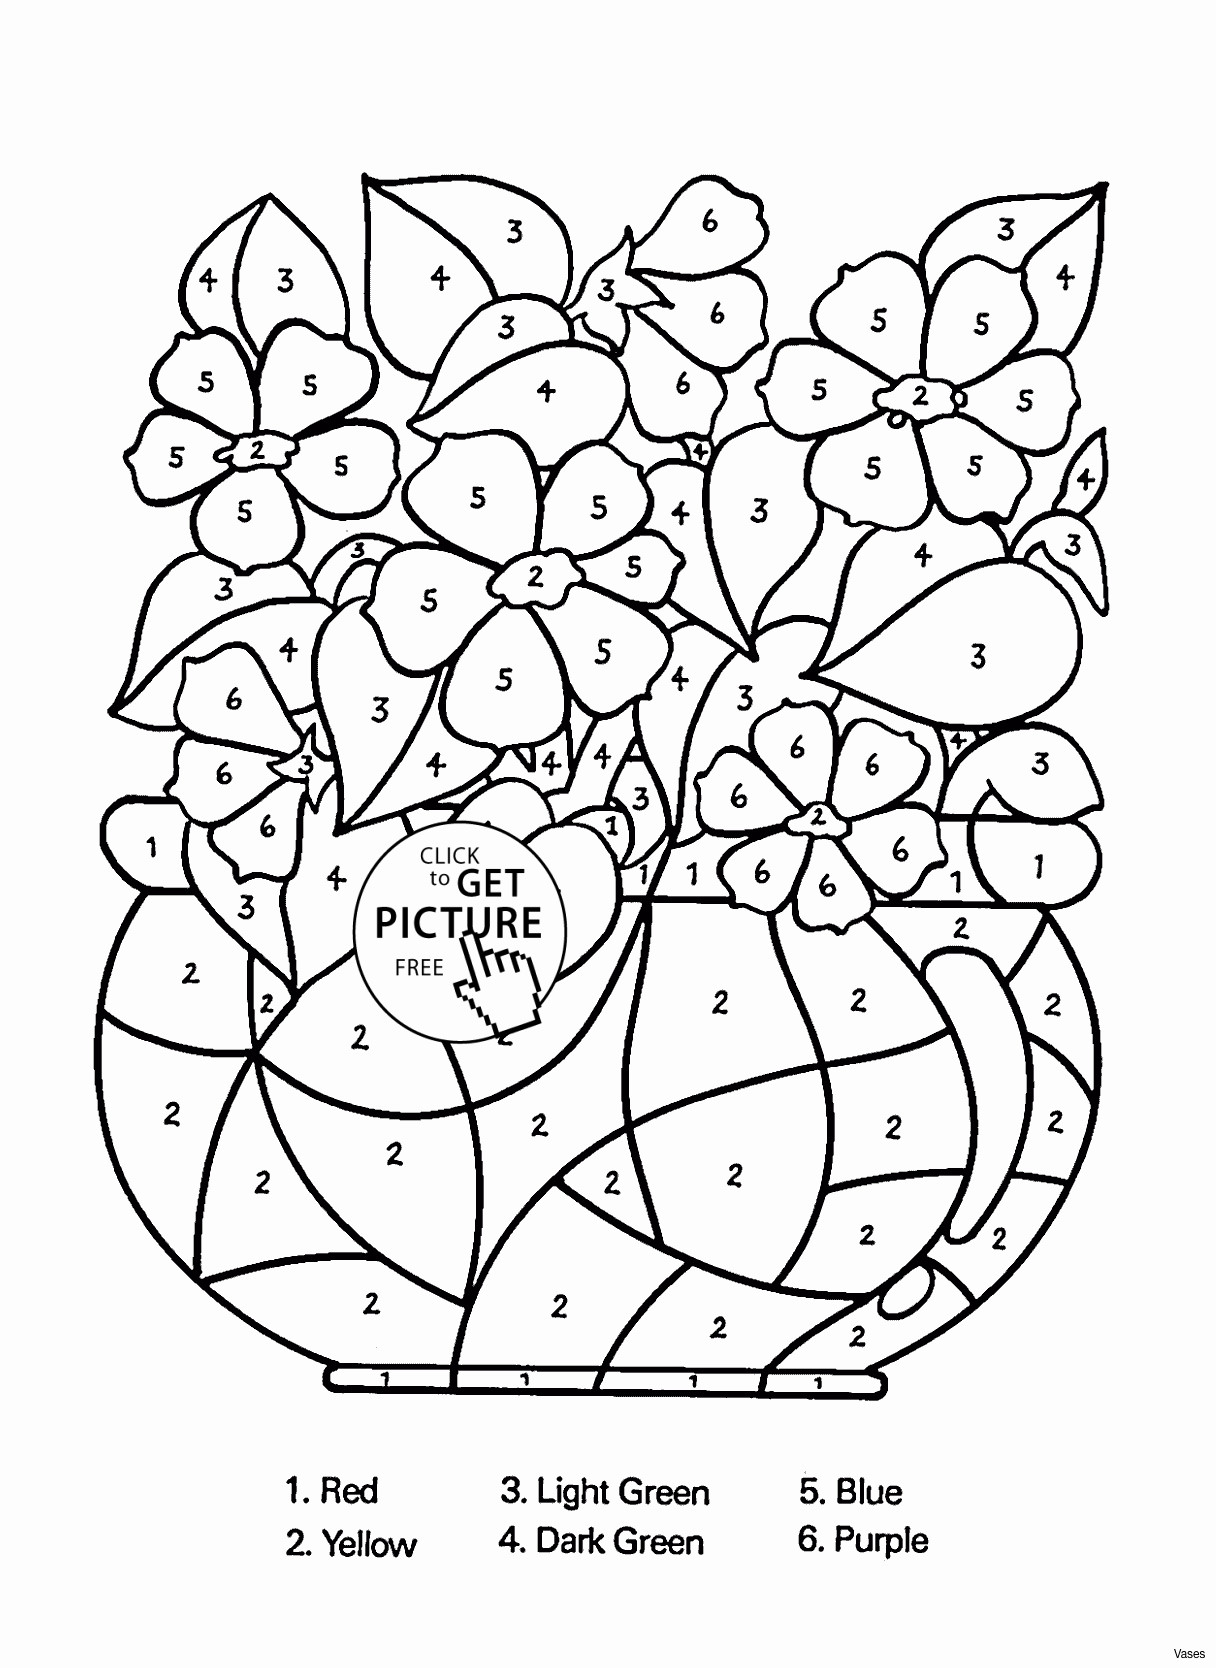 25 Amazing Fish In Plant Vase 2024 free download fish in plant vase of best of letter coloring sheet design for awesome letter coloring sheet free 15s vases flower vase coloring page pages flowers in a